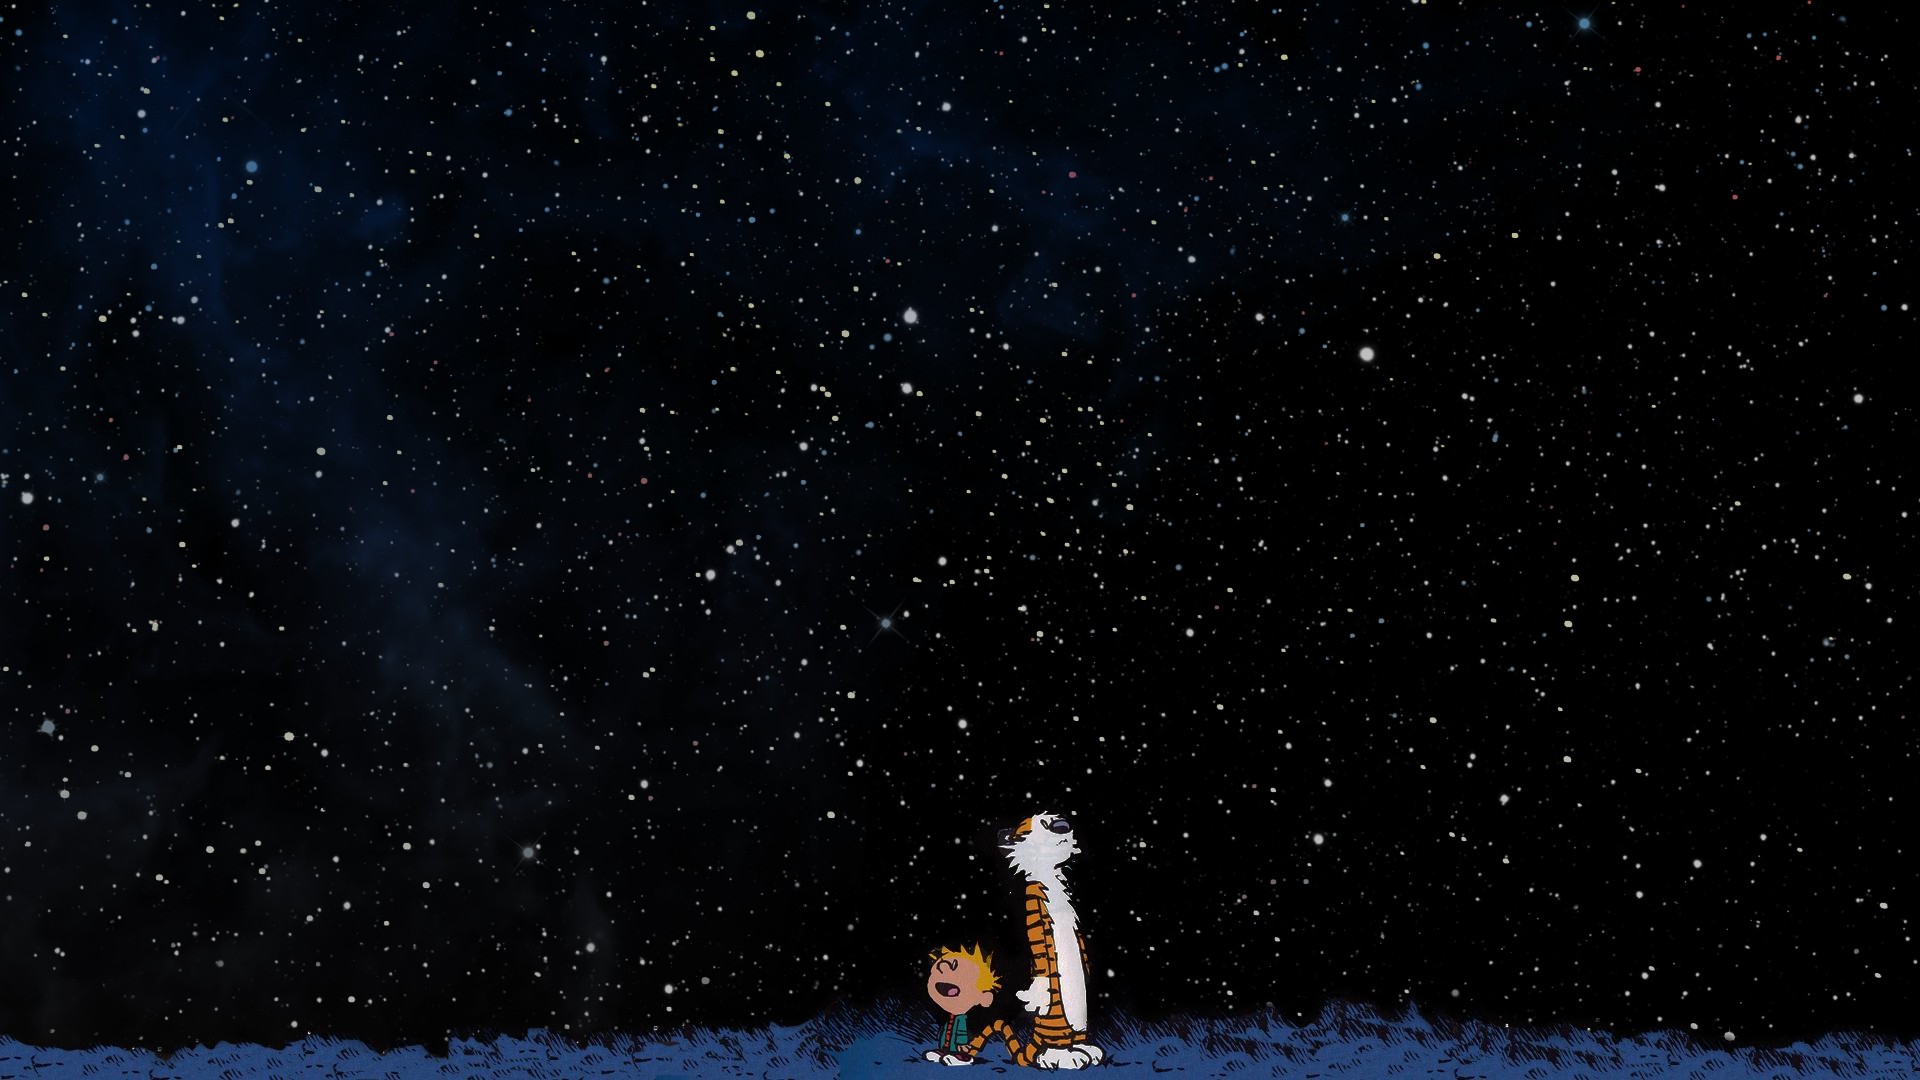 General 1920x1080 space stars Calvin and Hobbes cartoon starry night looking up